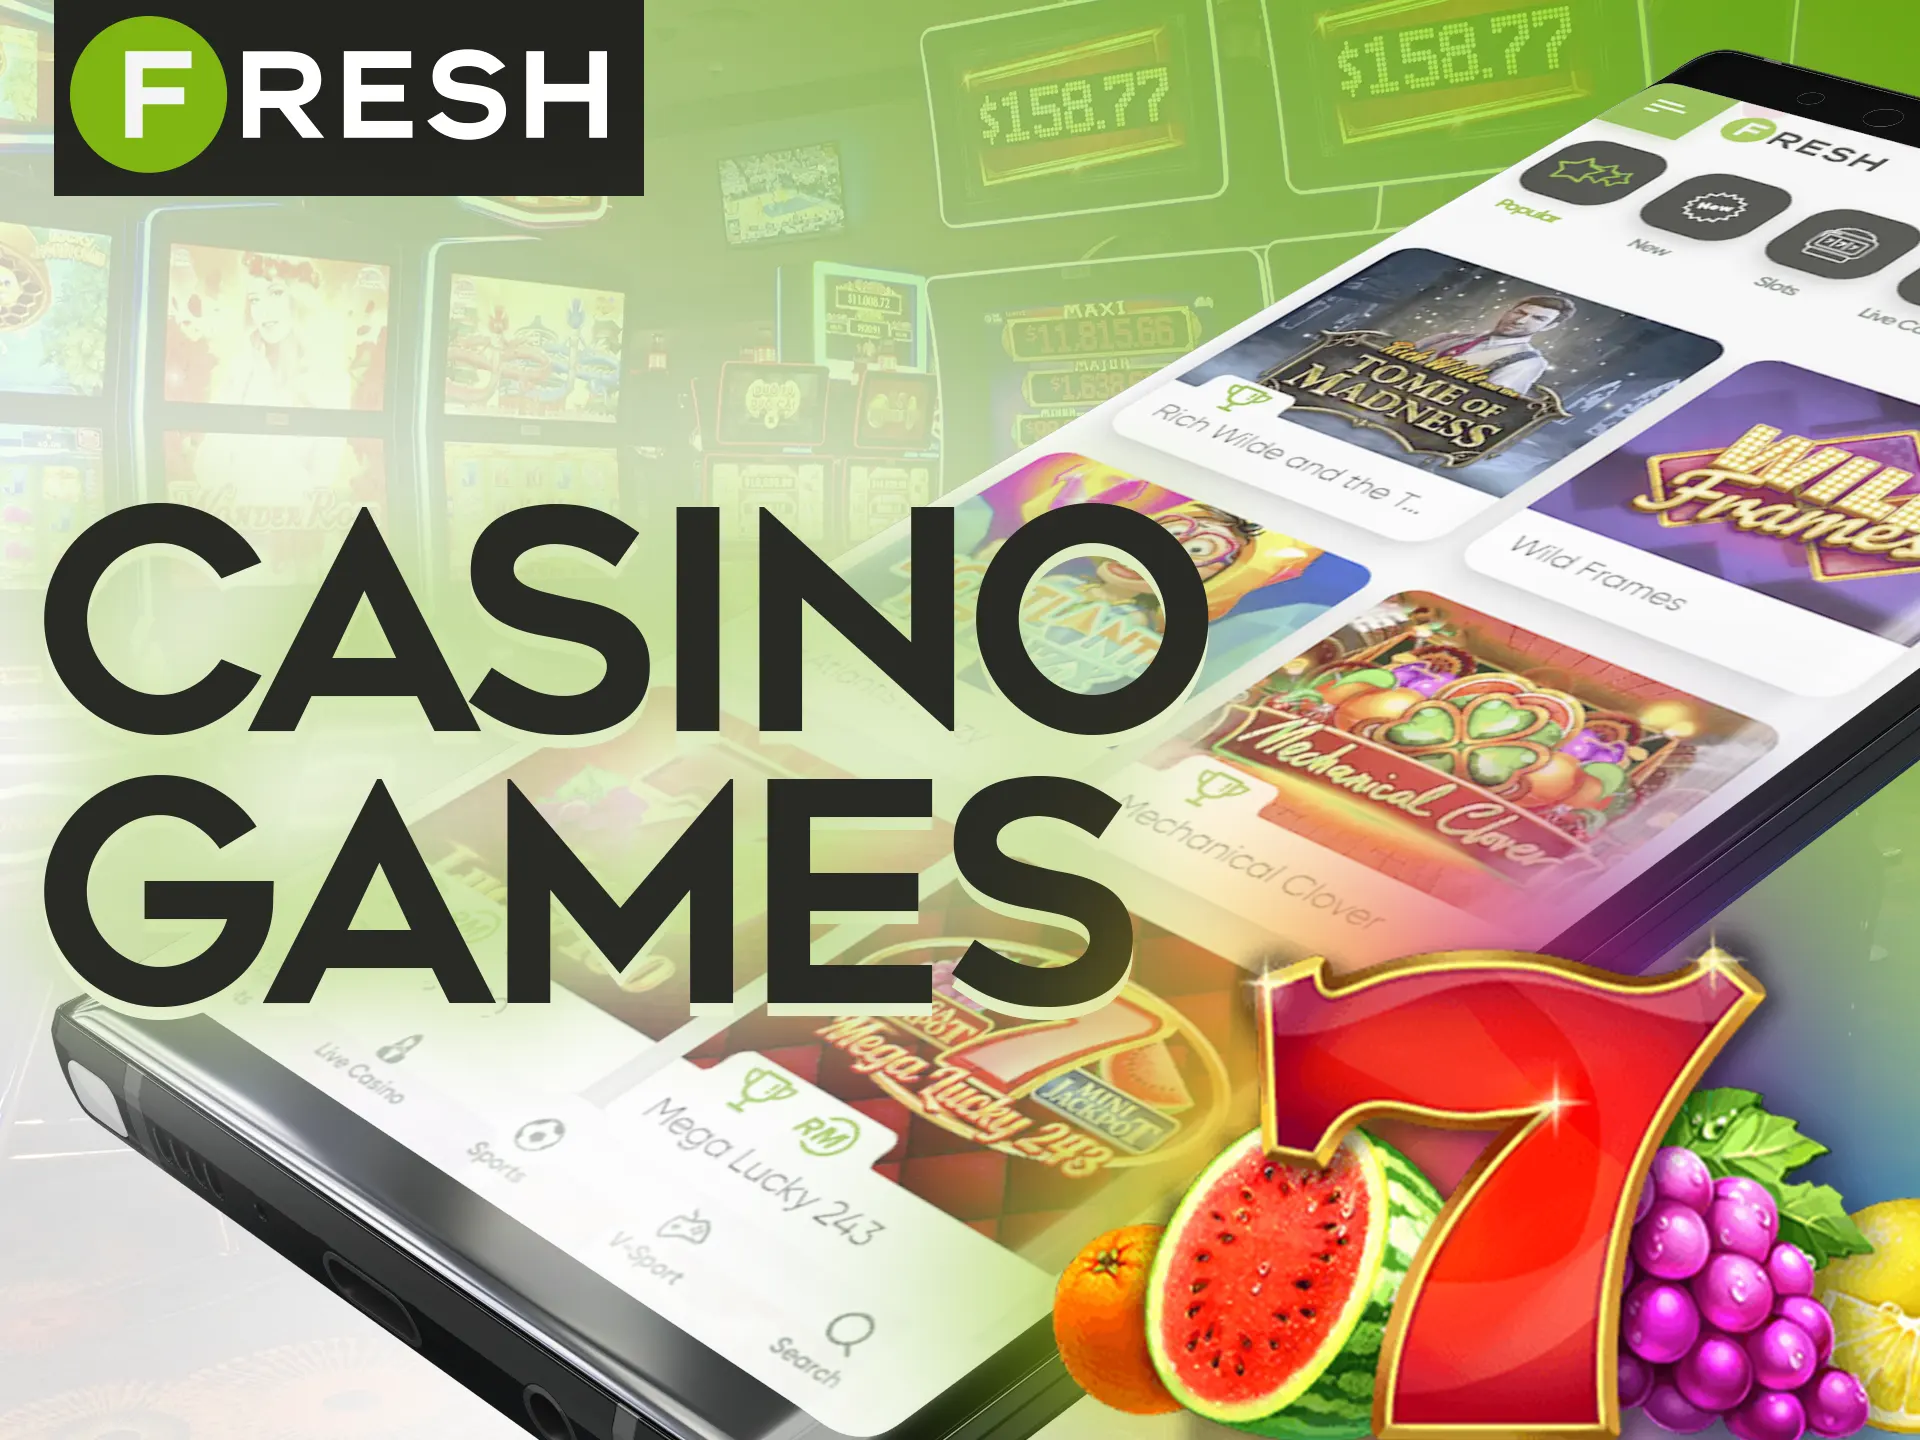 Play your favorite Fresh Casino casino games in the app.